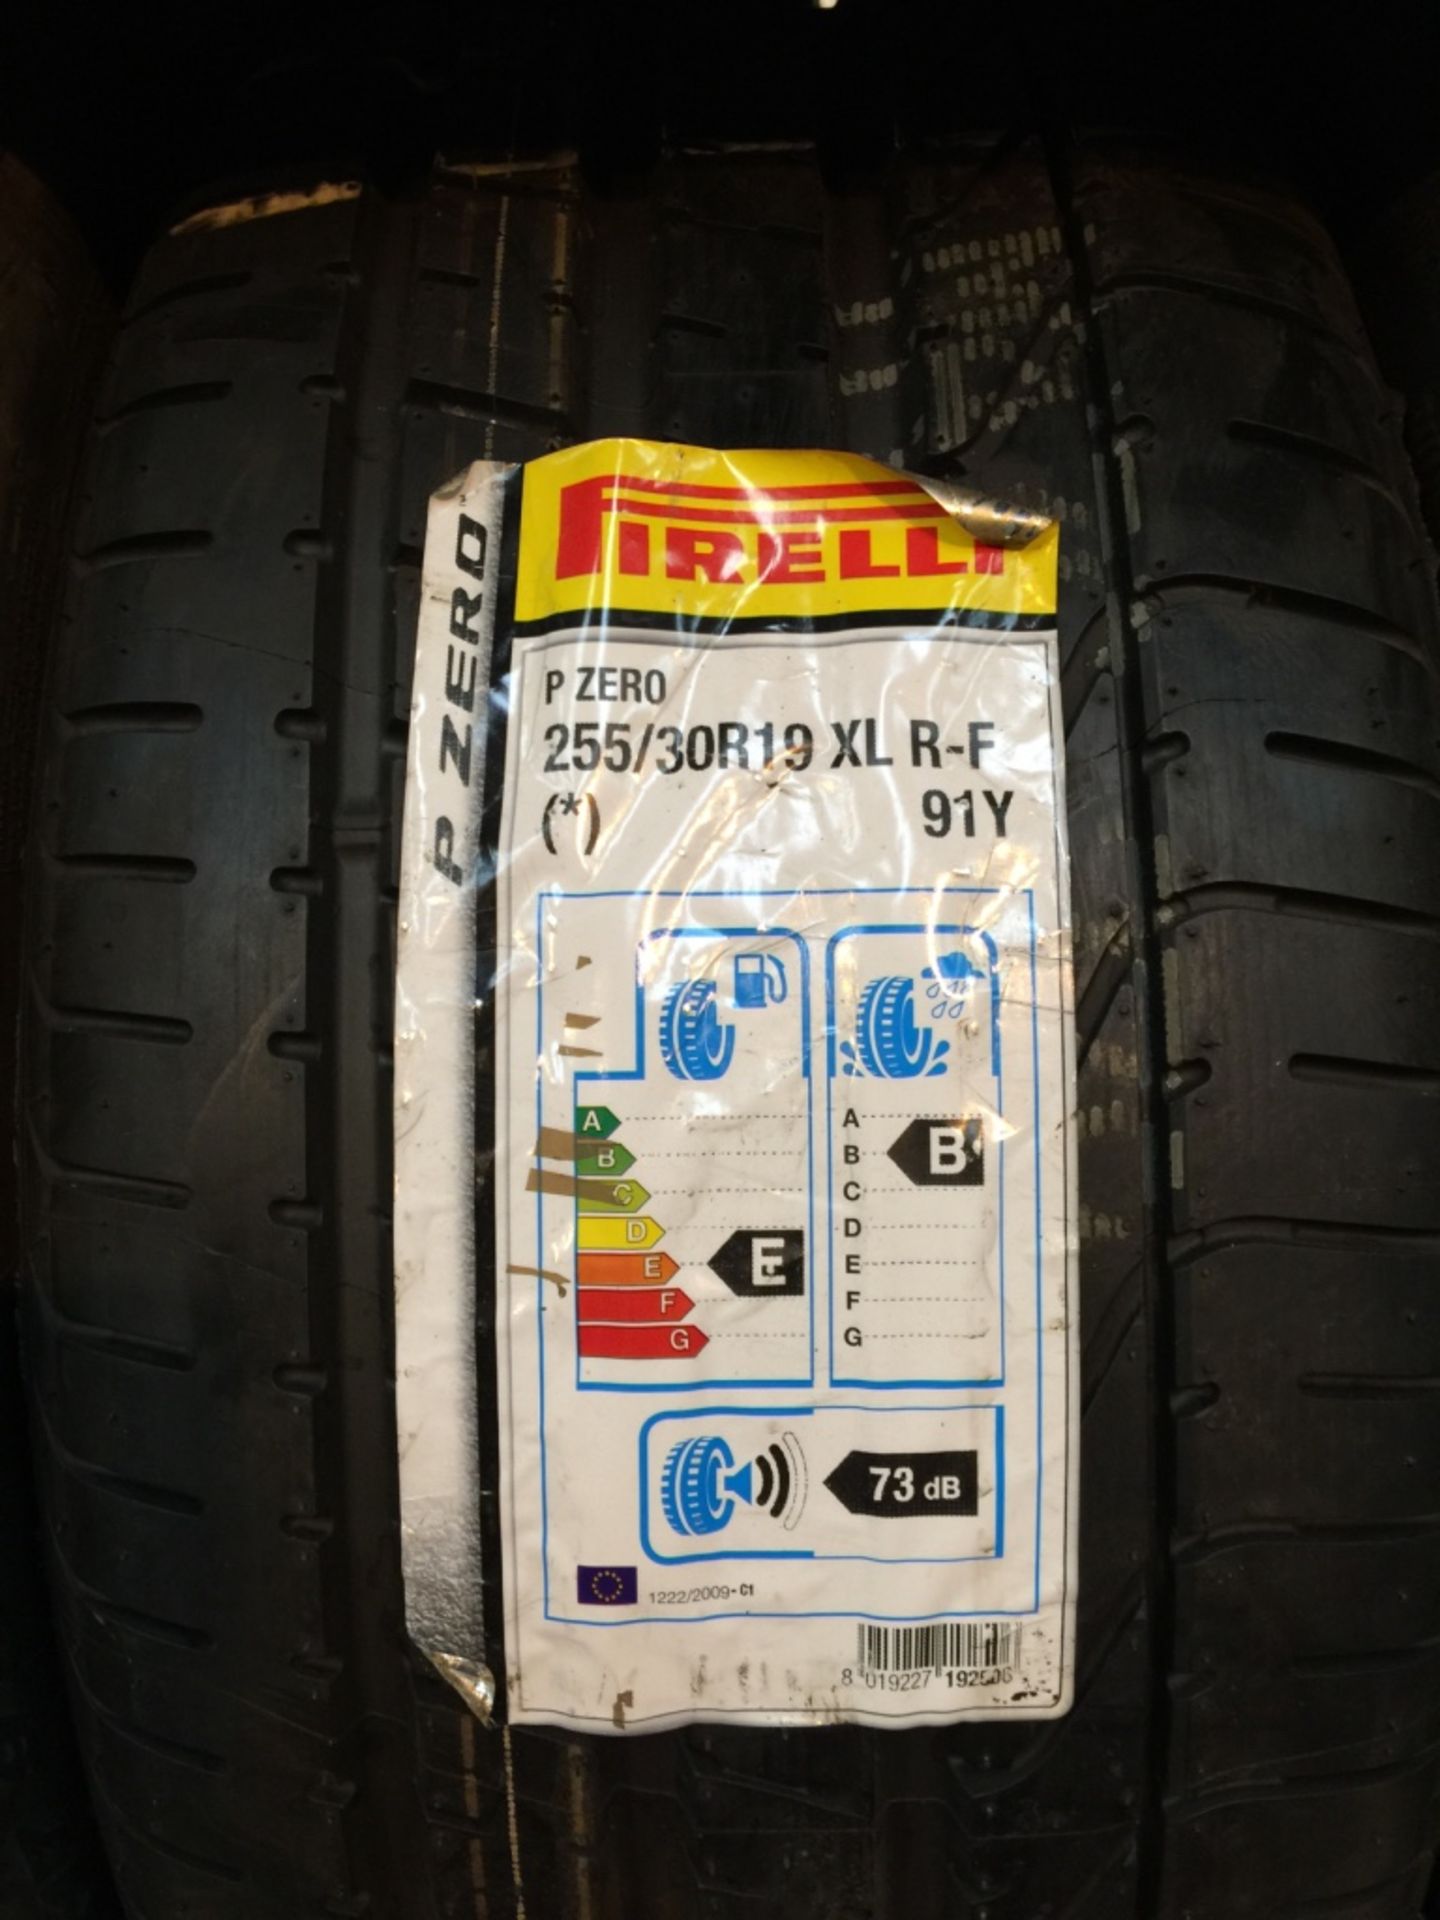 54: Pirelli Tyres Car & 4X4 - Many Large Sizes to include 18,19,21" Please see further Pictures ( - Image 47 of 55